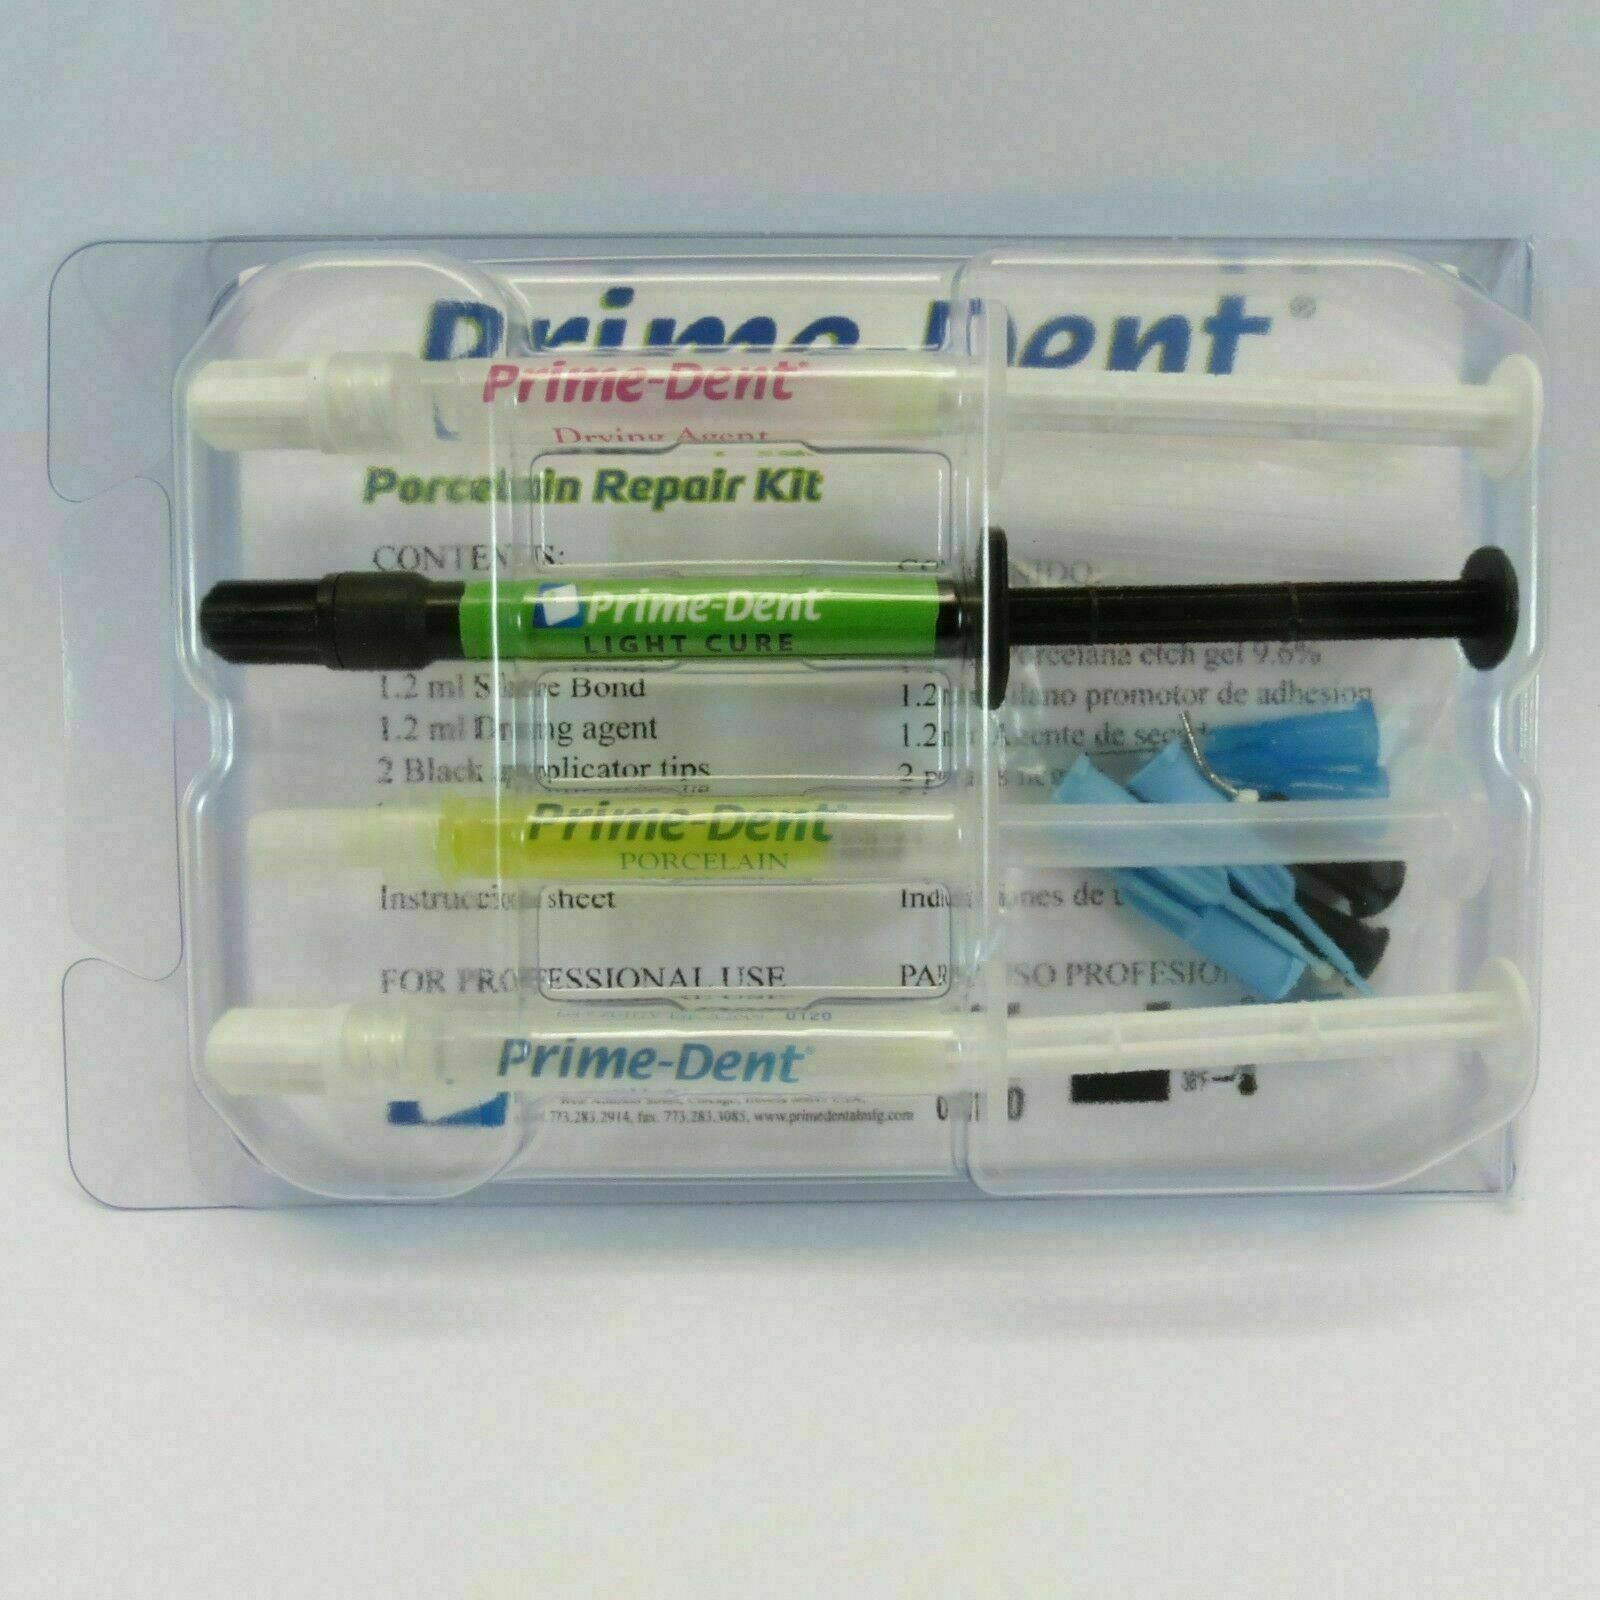 Porcelain Repair Kit - Optident - Specialist Dental Products And